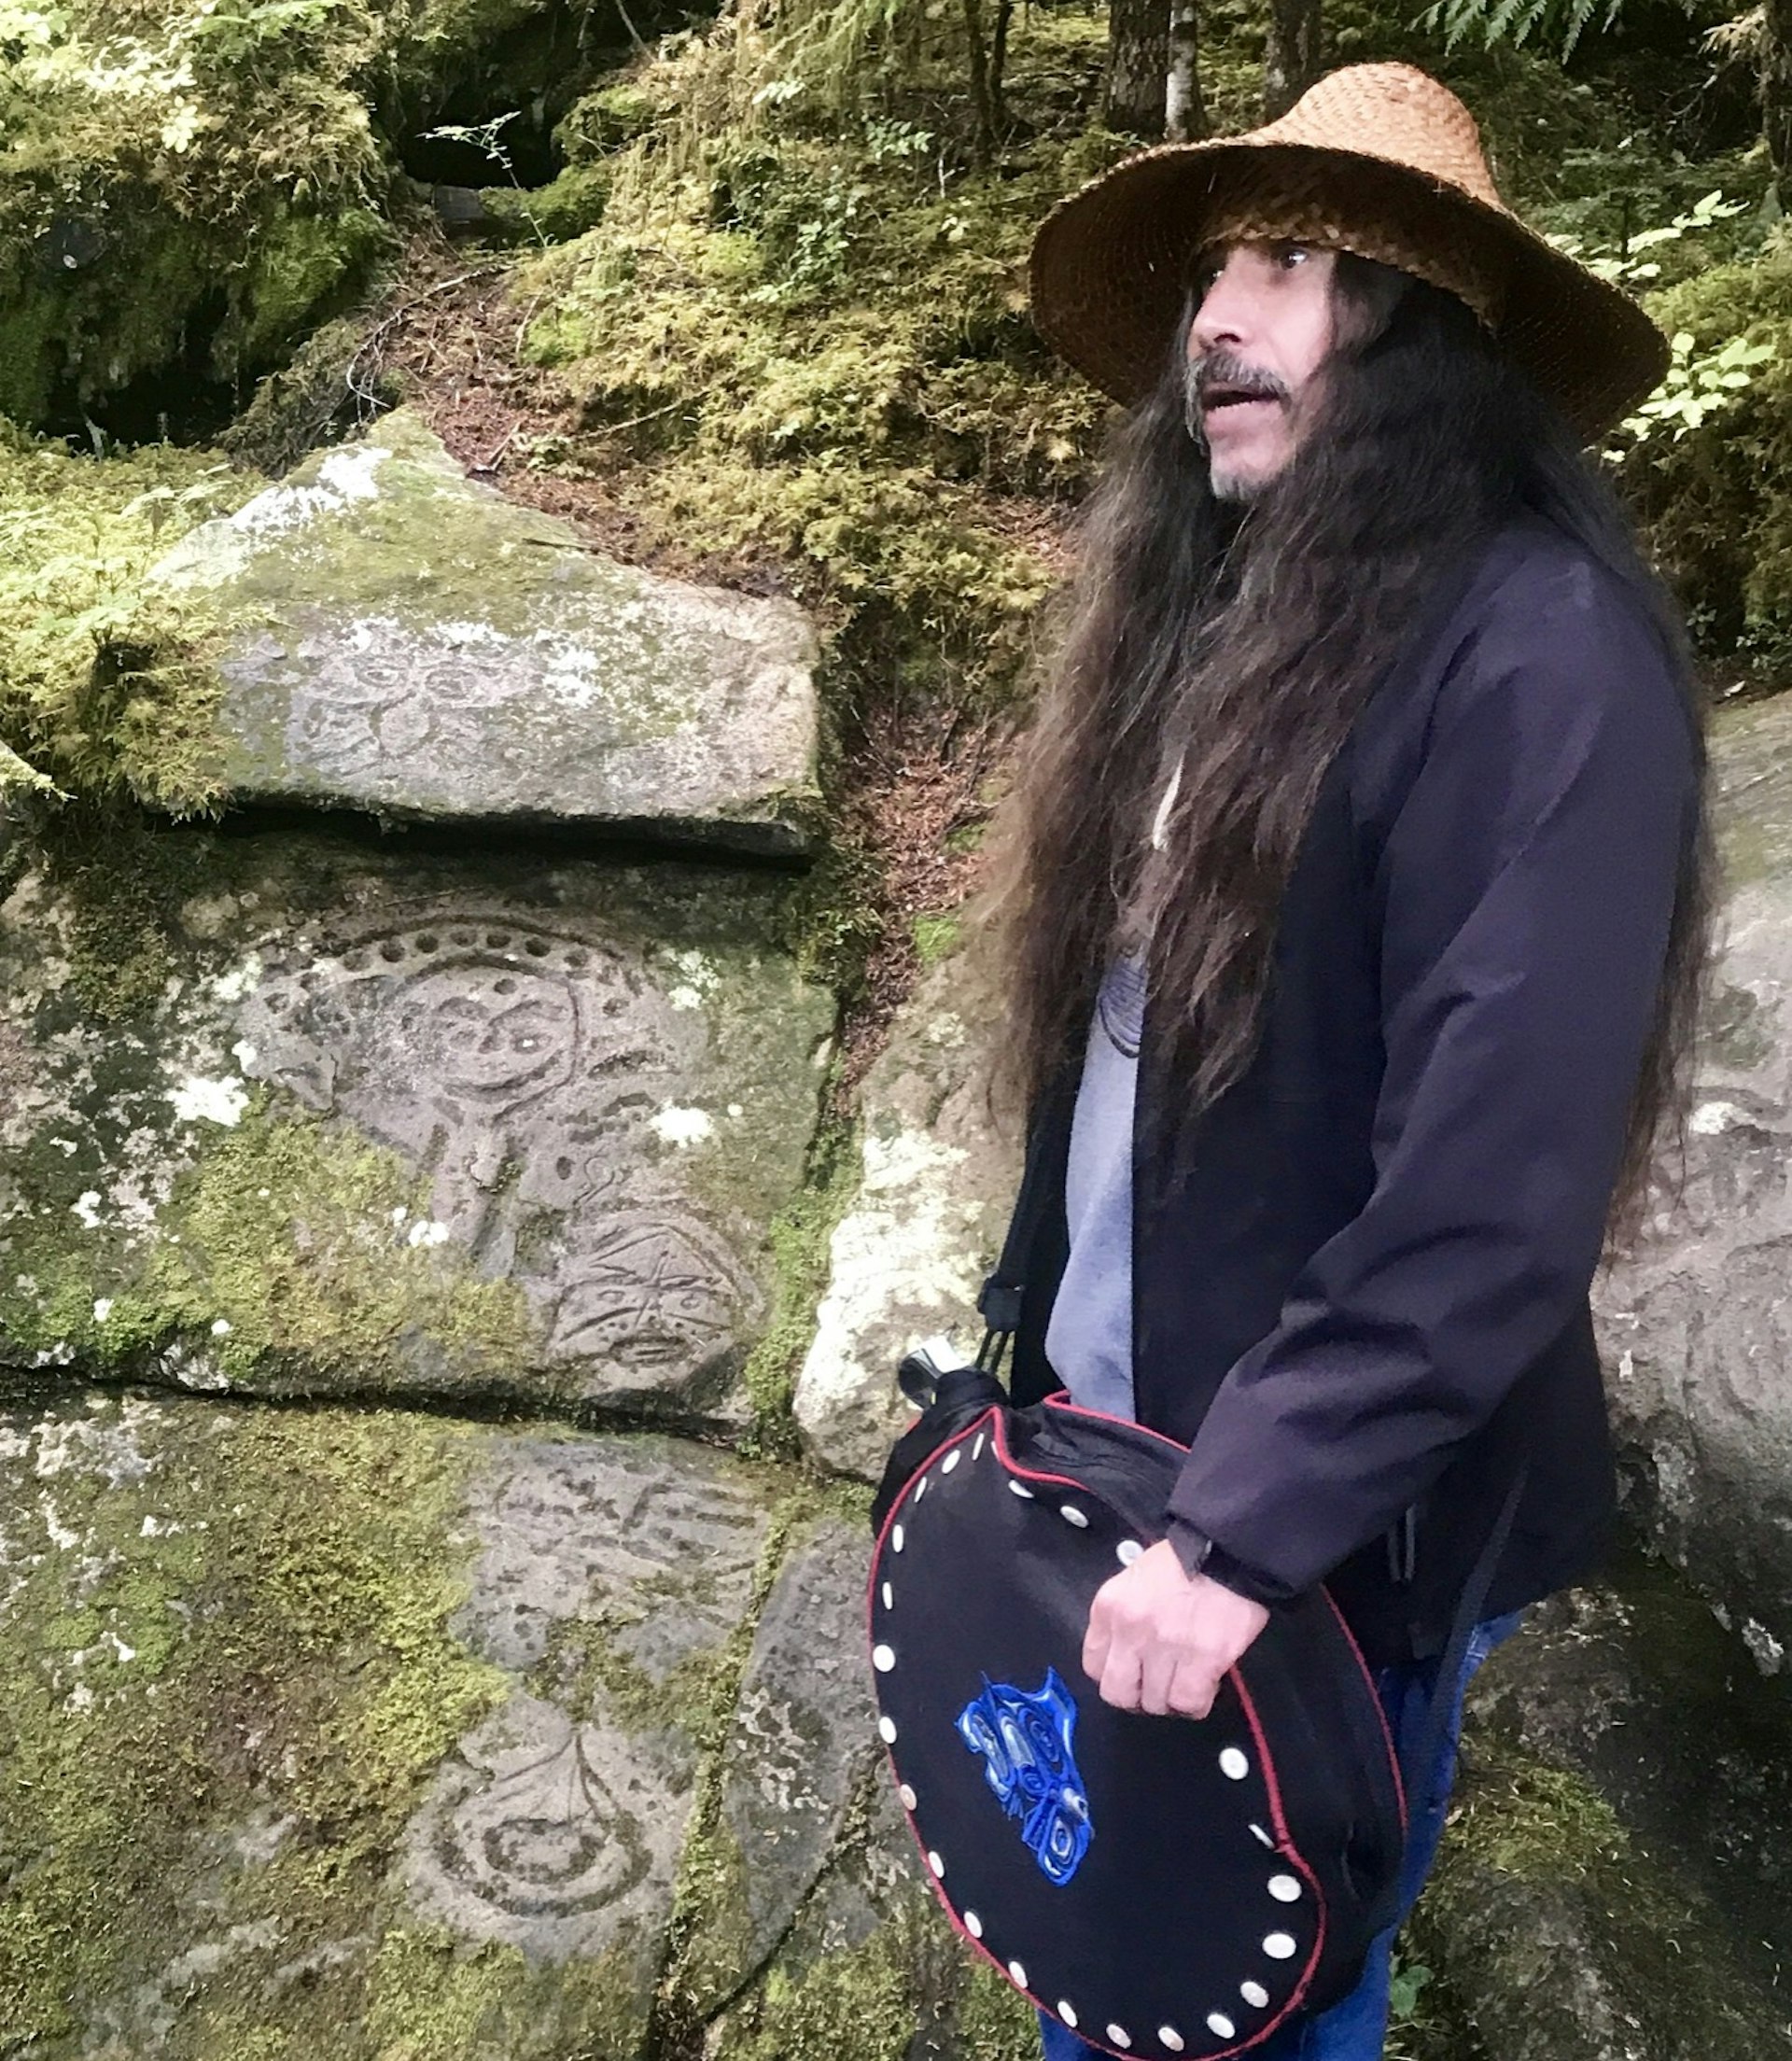 Ancient carvings etched in stone share space with green moss as a man with a drum and reed hat tells stories nearby.